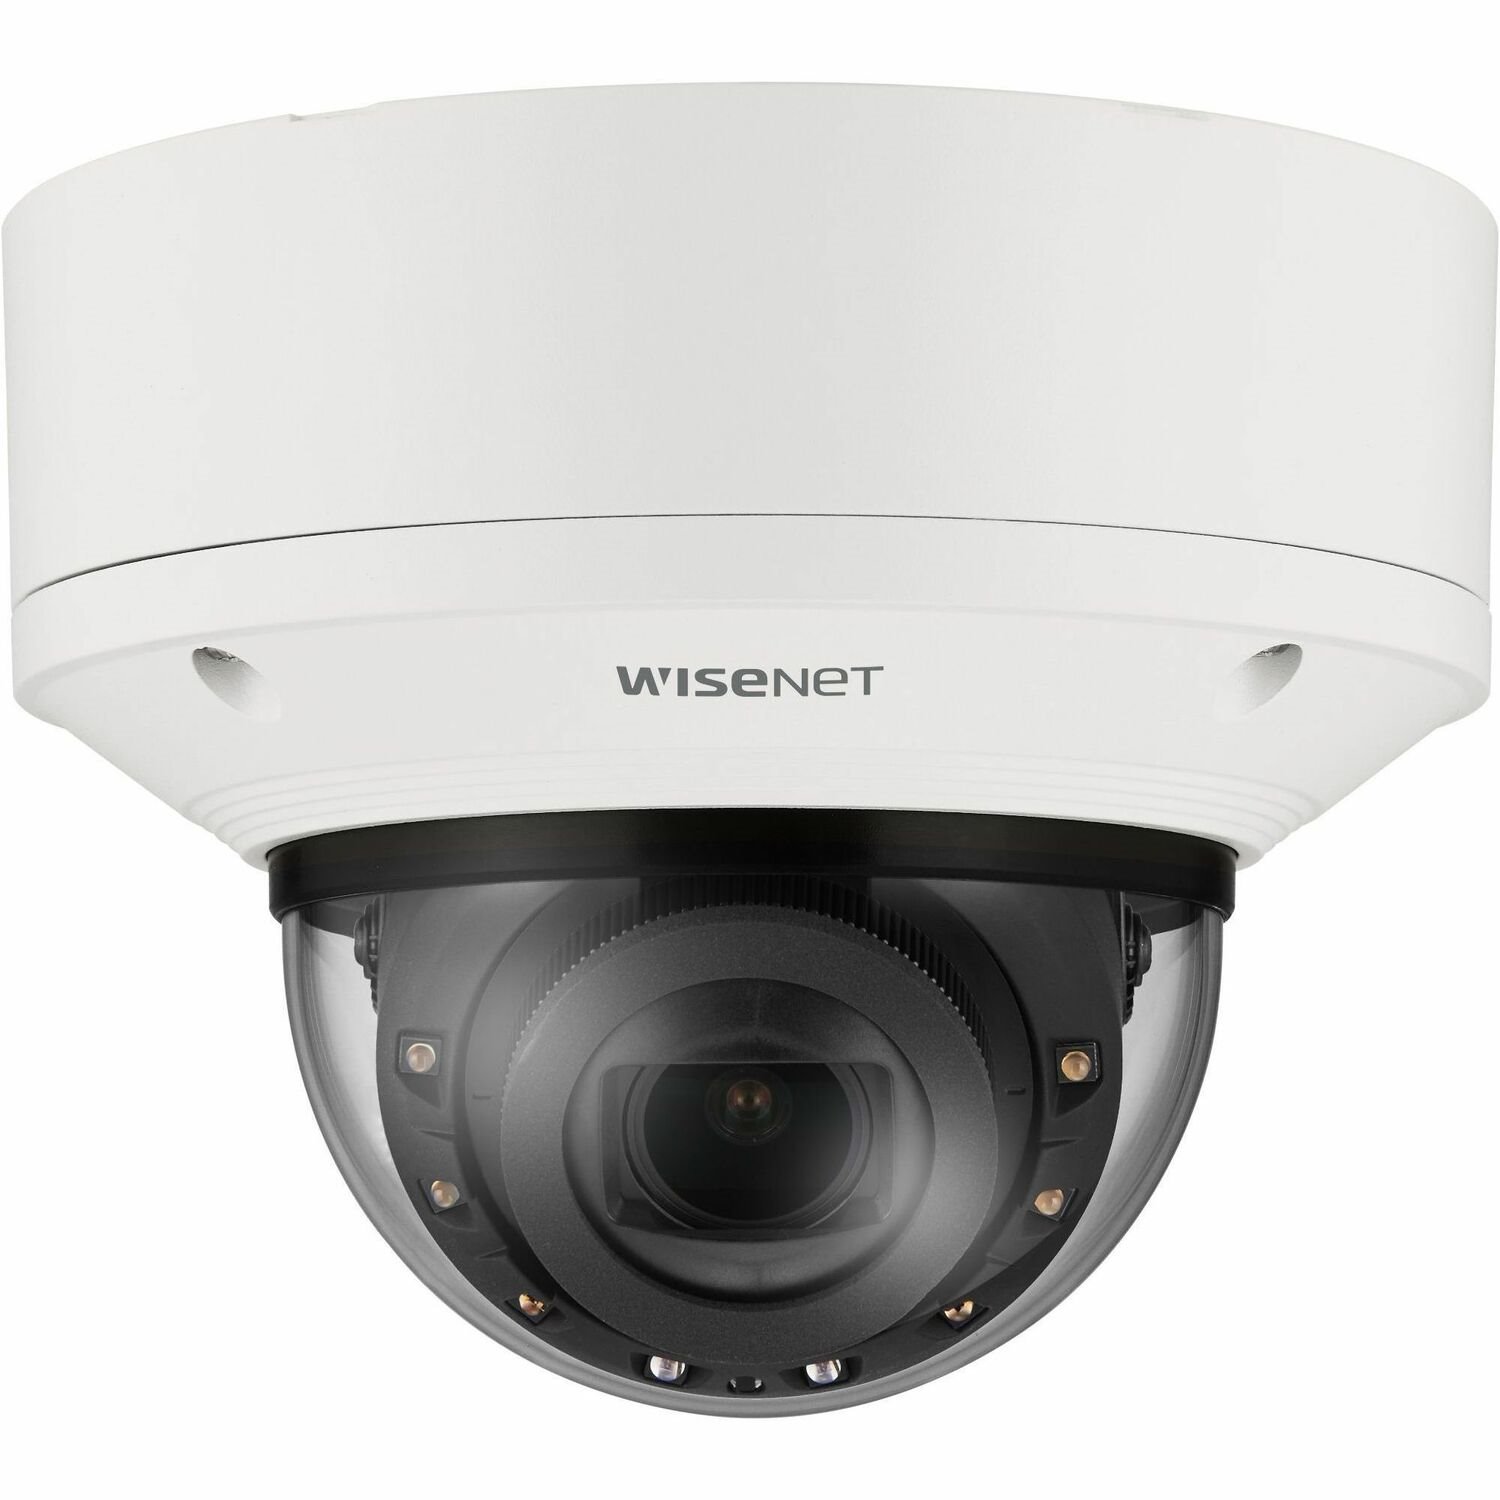 Wisenet XNV-8093R 6 Megapixel Outdoor Network Camera - Color - Dome - White - TAA Compliant